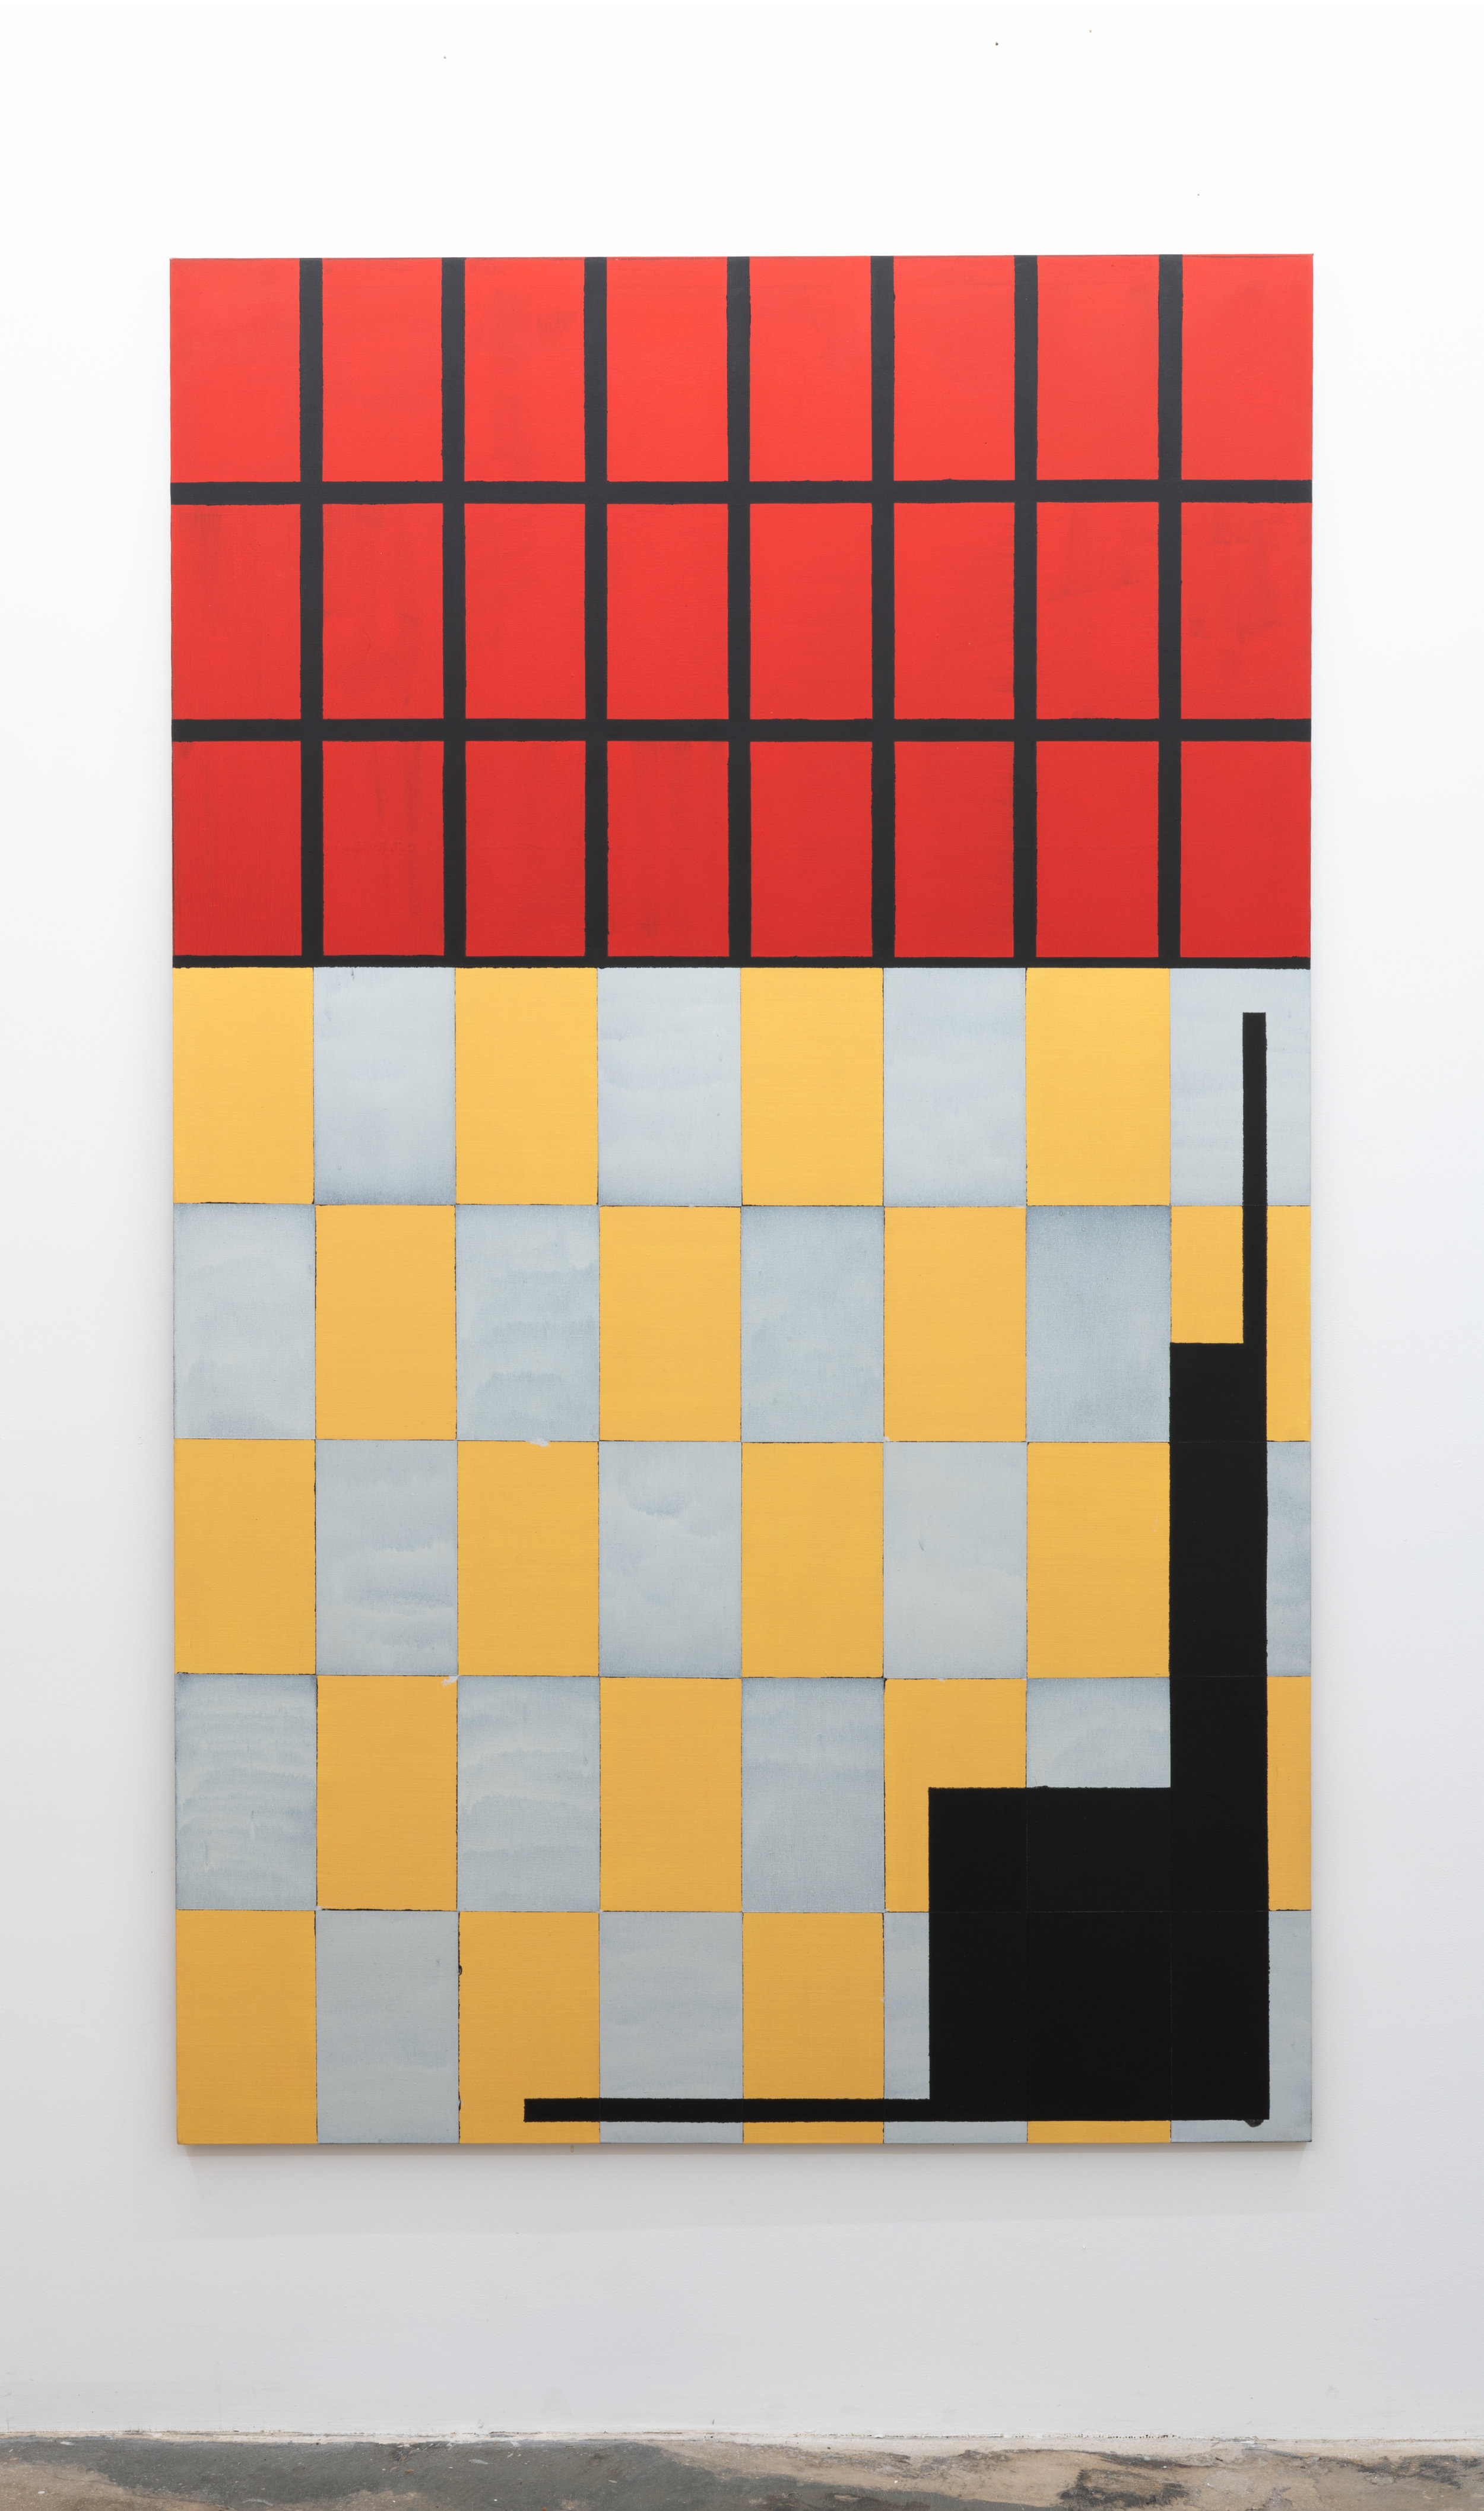  Joshua Abelow,  Untitled , 2017, Oil on linen, 80 x 48 inches 